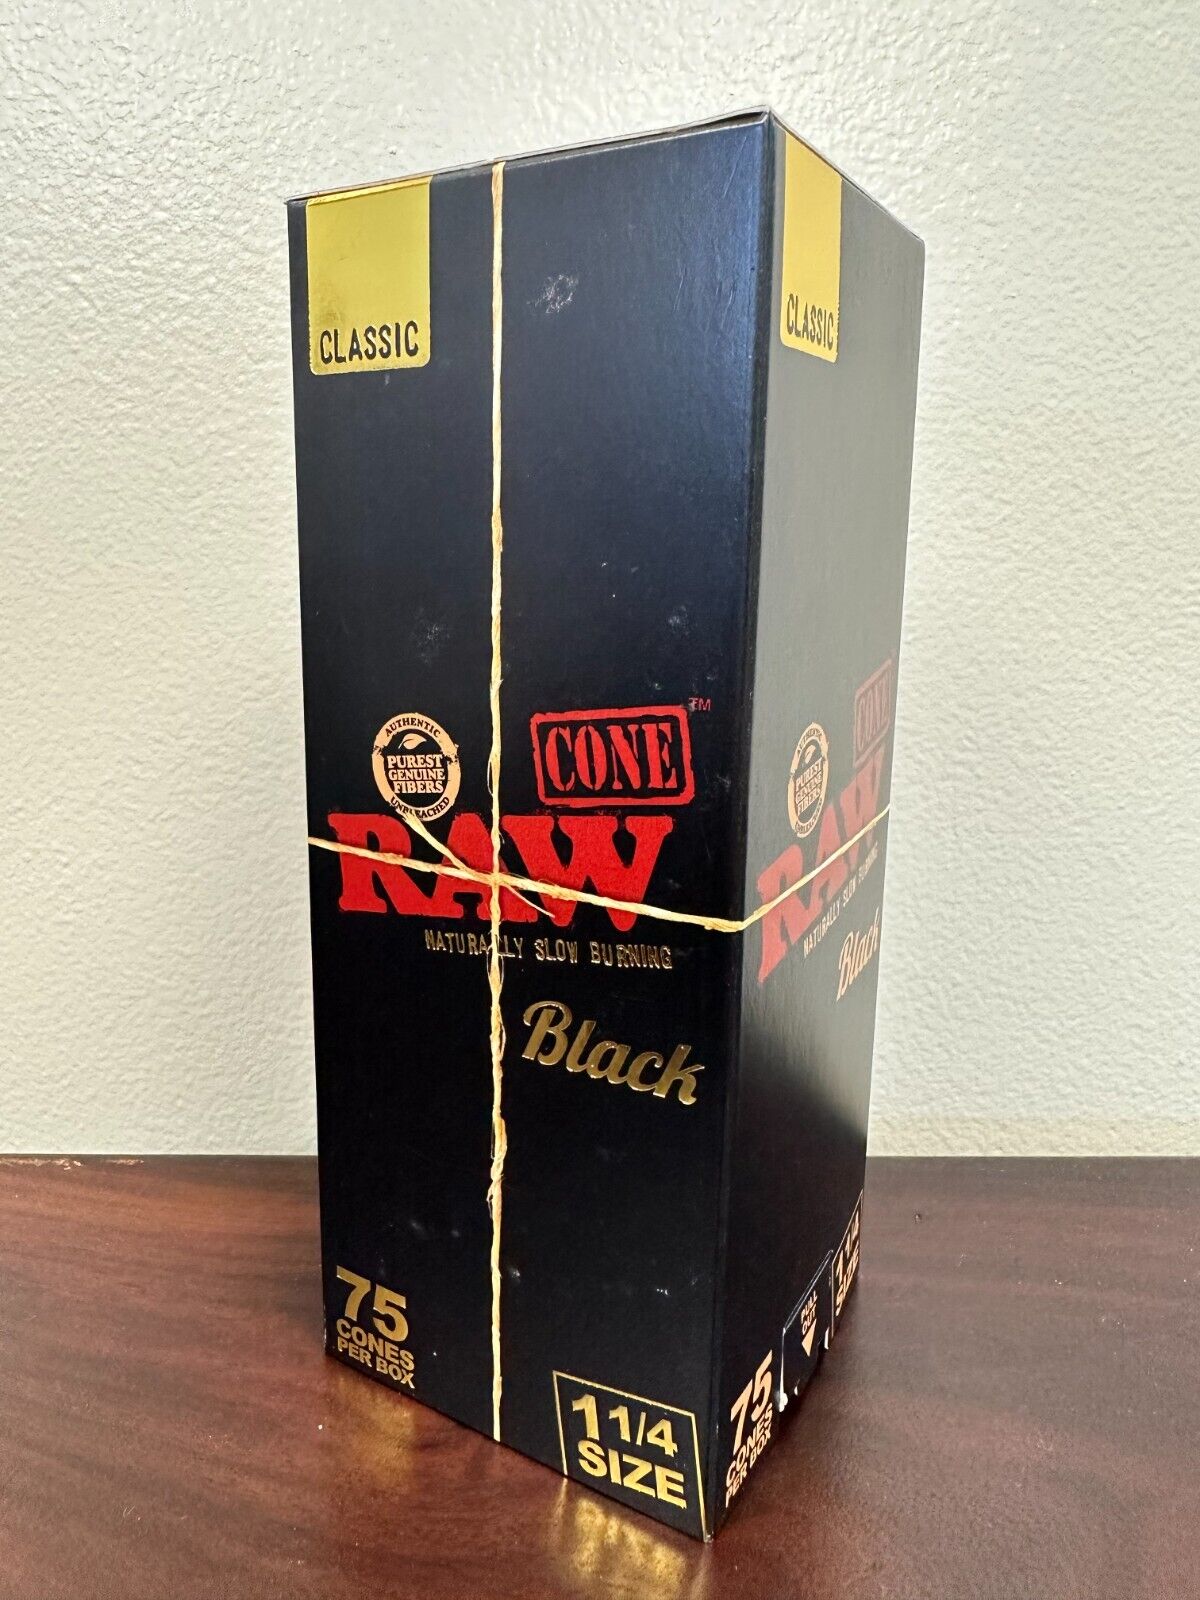 RAW BLACK 1 1/4 SIZE PRE-ROLLED CONES 75 COUNT- MINI TOWER BOX CIGARETTE PAPER. Available Now for 20.95